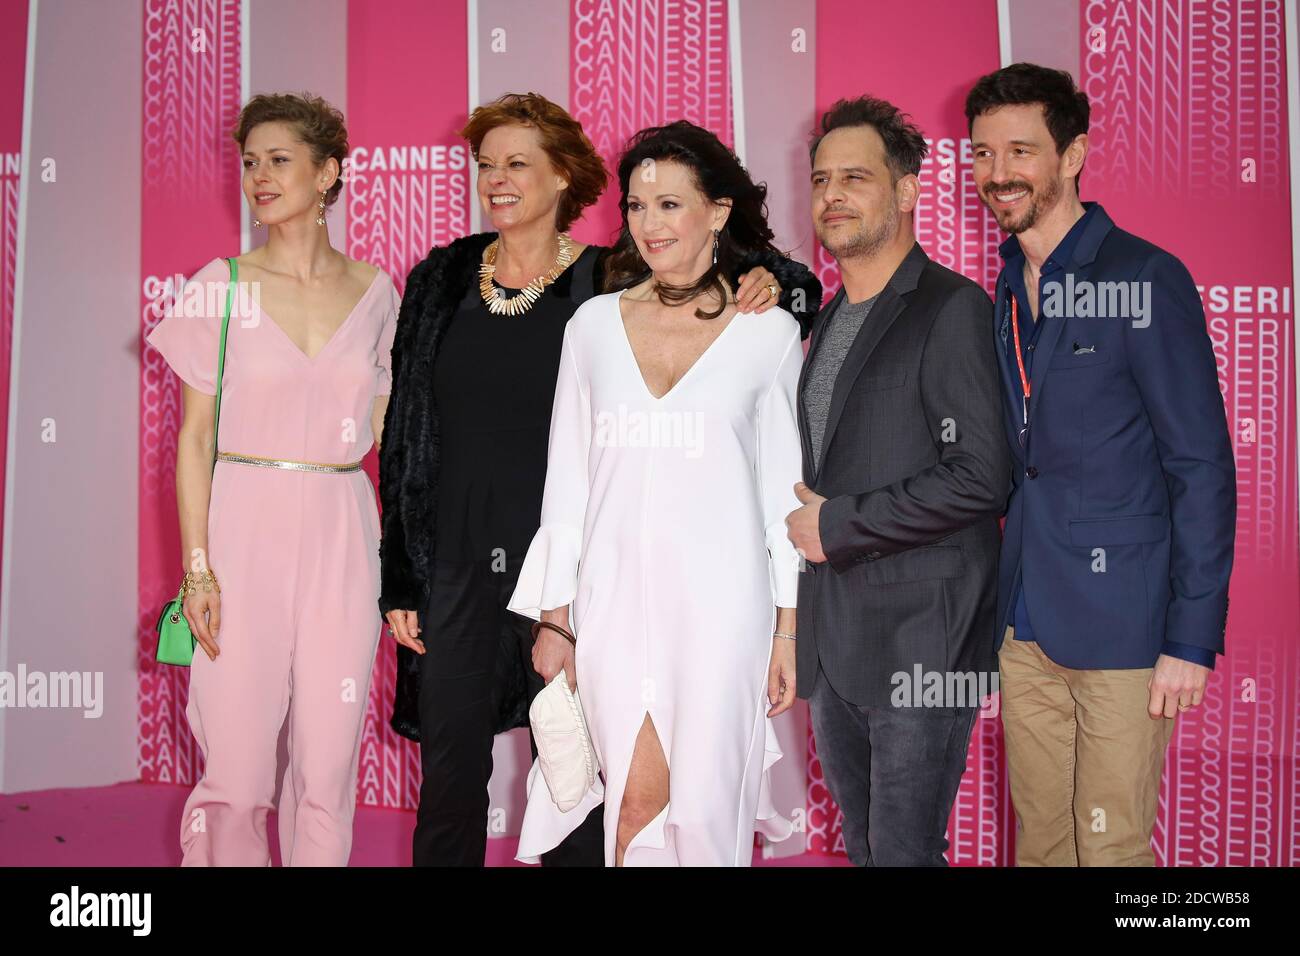 (l-r) Katharina Schlothauer, Nina Grosse, Iris Berben, Moritz Bleibtreu and Jan Ehlert attend 'Killing Eve' and 'When Heroes Fly' screening during the CanneSeries 2018 at the Palais du Festival in Cannes (France) , on april 8th, 2018. Photo by Marco Piovanotto/ABACAPRESS.COM Stock Photo